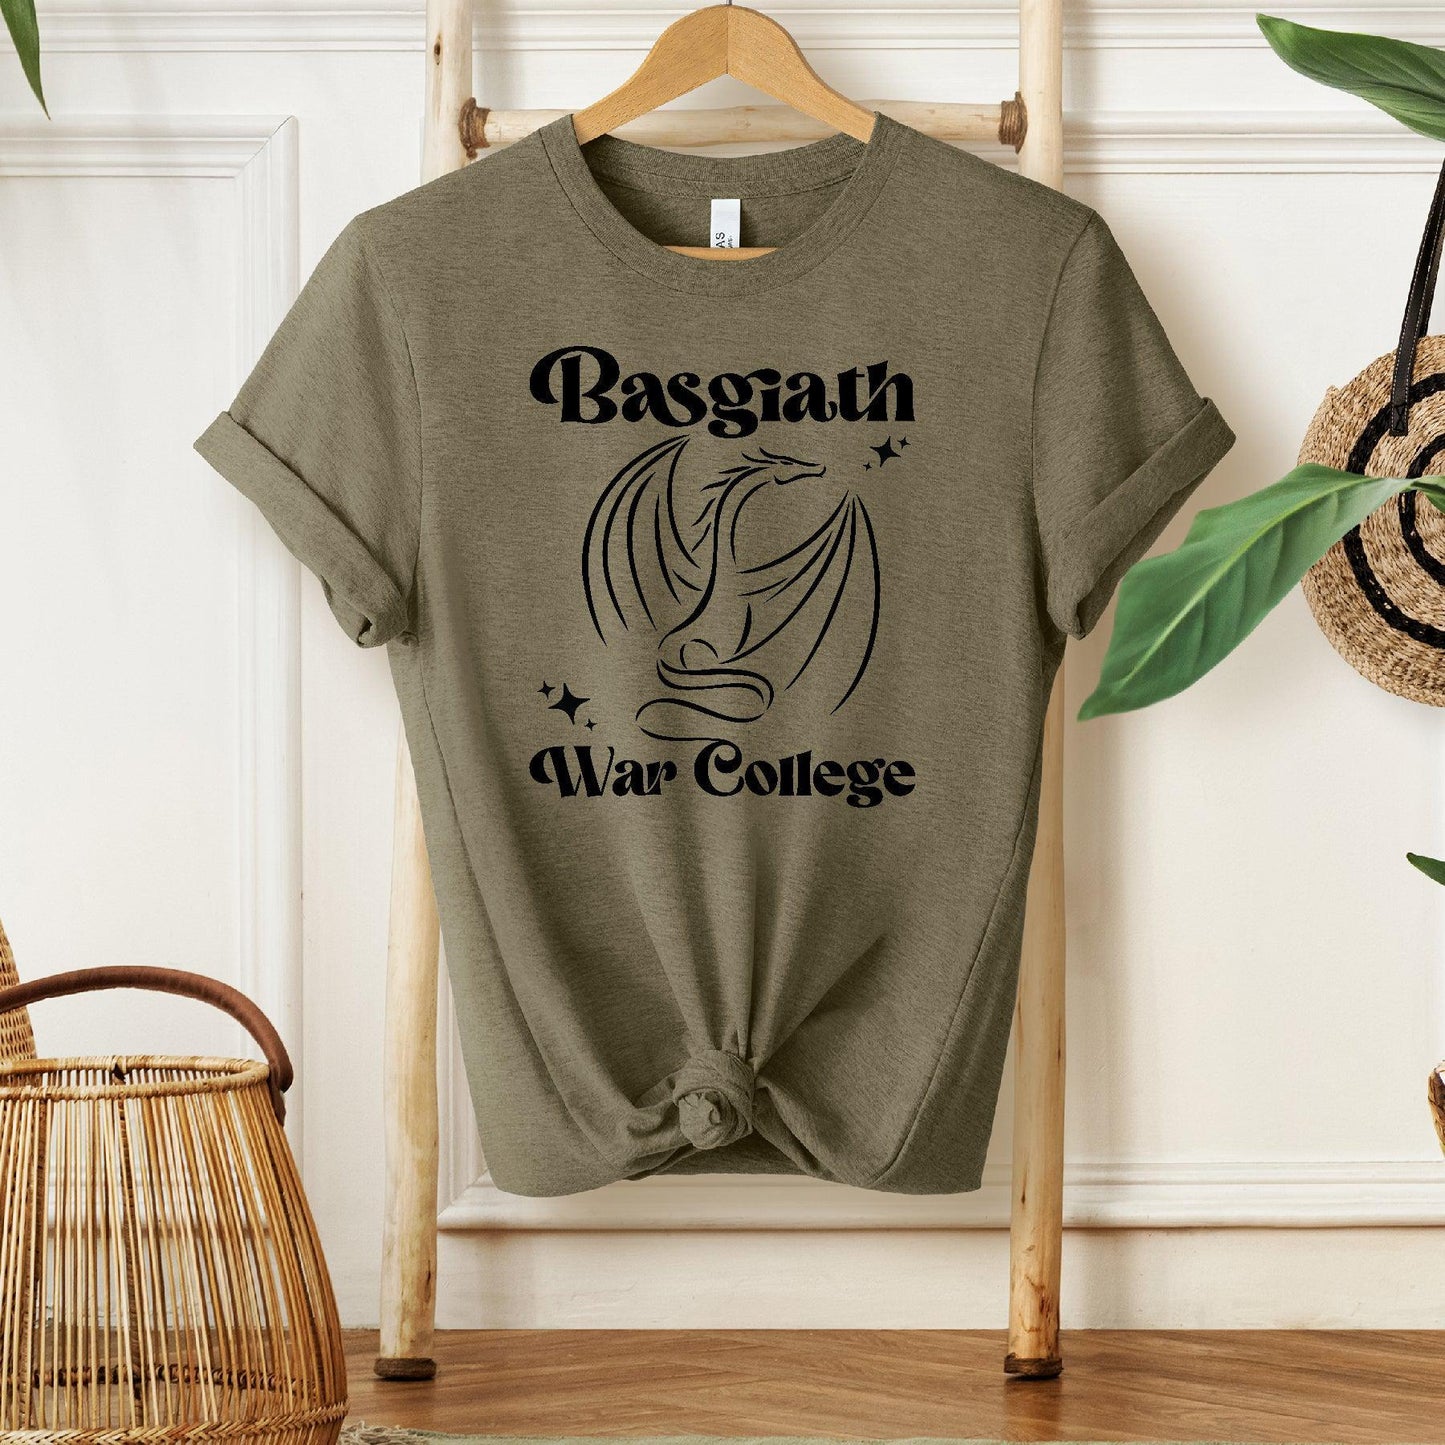 Basgiath War College Fourth Wing Tee - Officially Licensed-Cricket Paper Co.